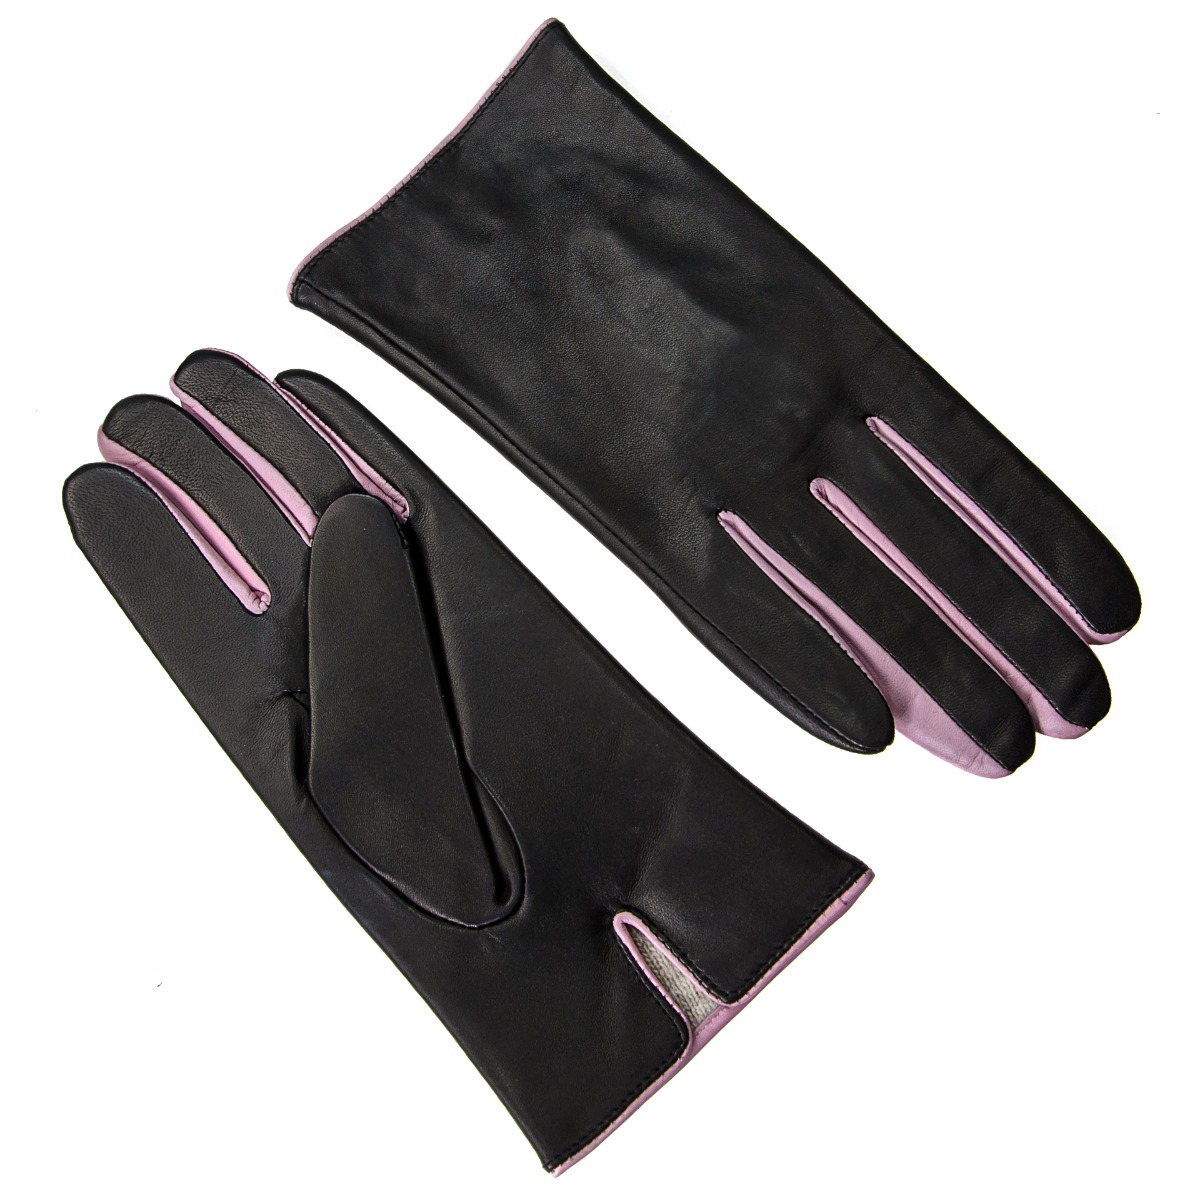 Leather gloves XL - Allora image 2